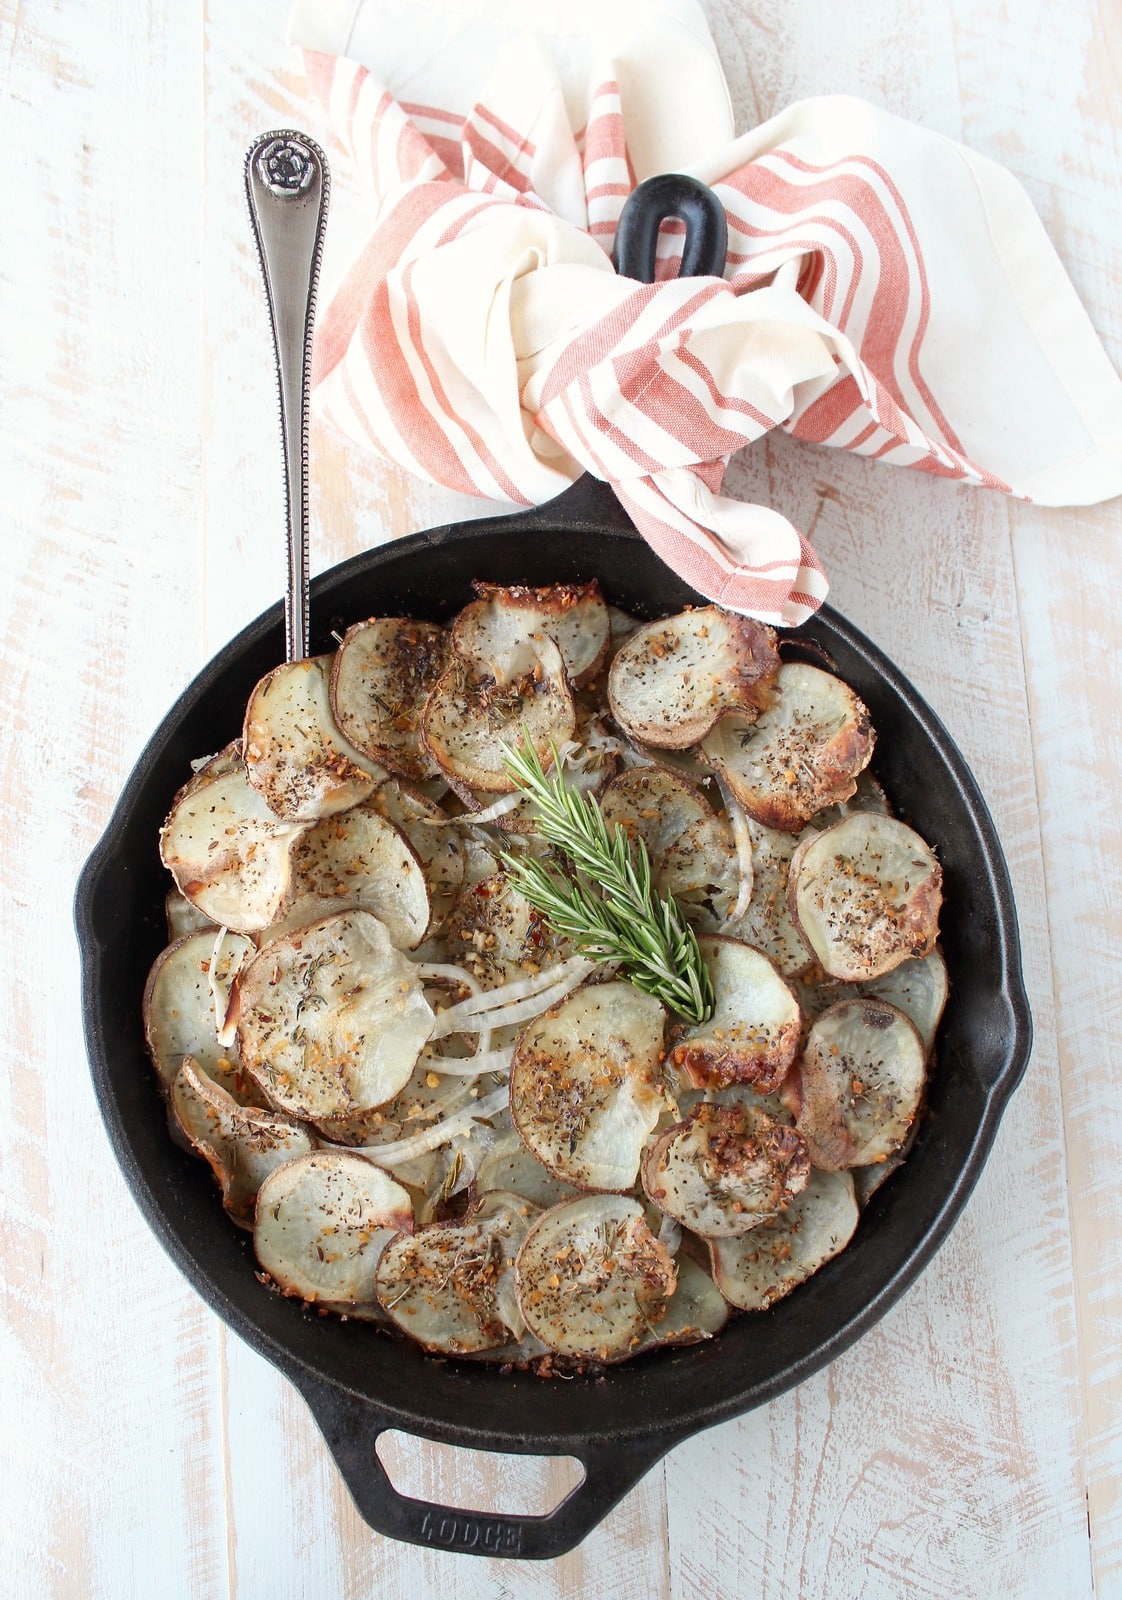 A cast iron skillet on a wooden surface filled with sliced and seasoned potatoes.